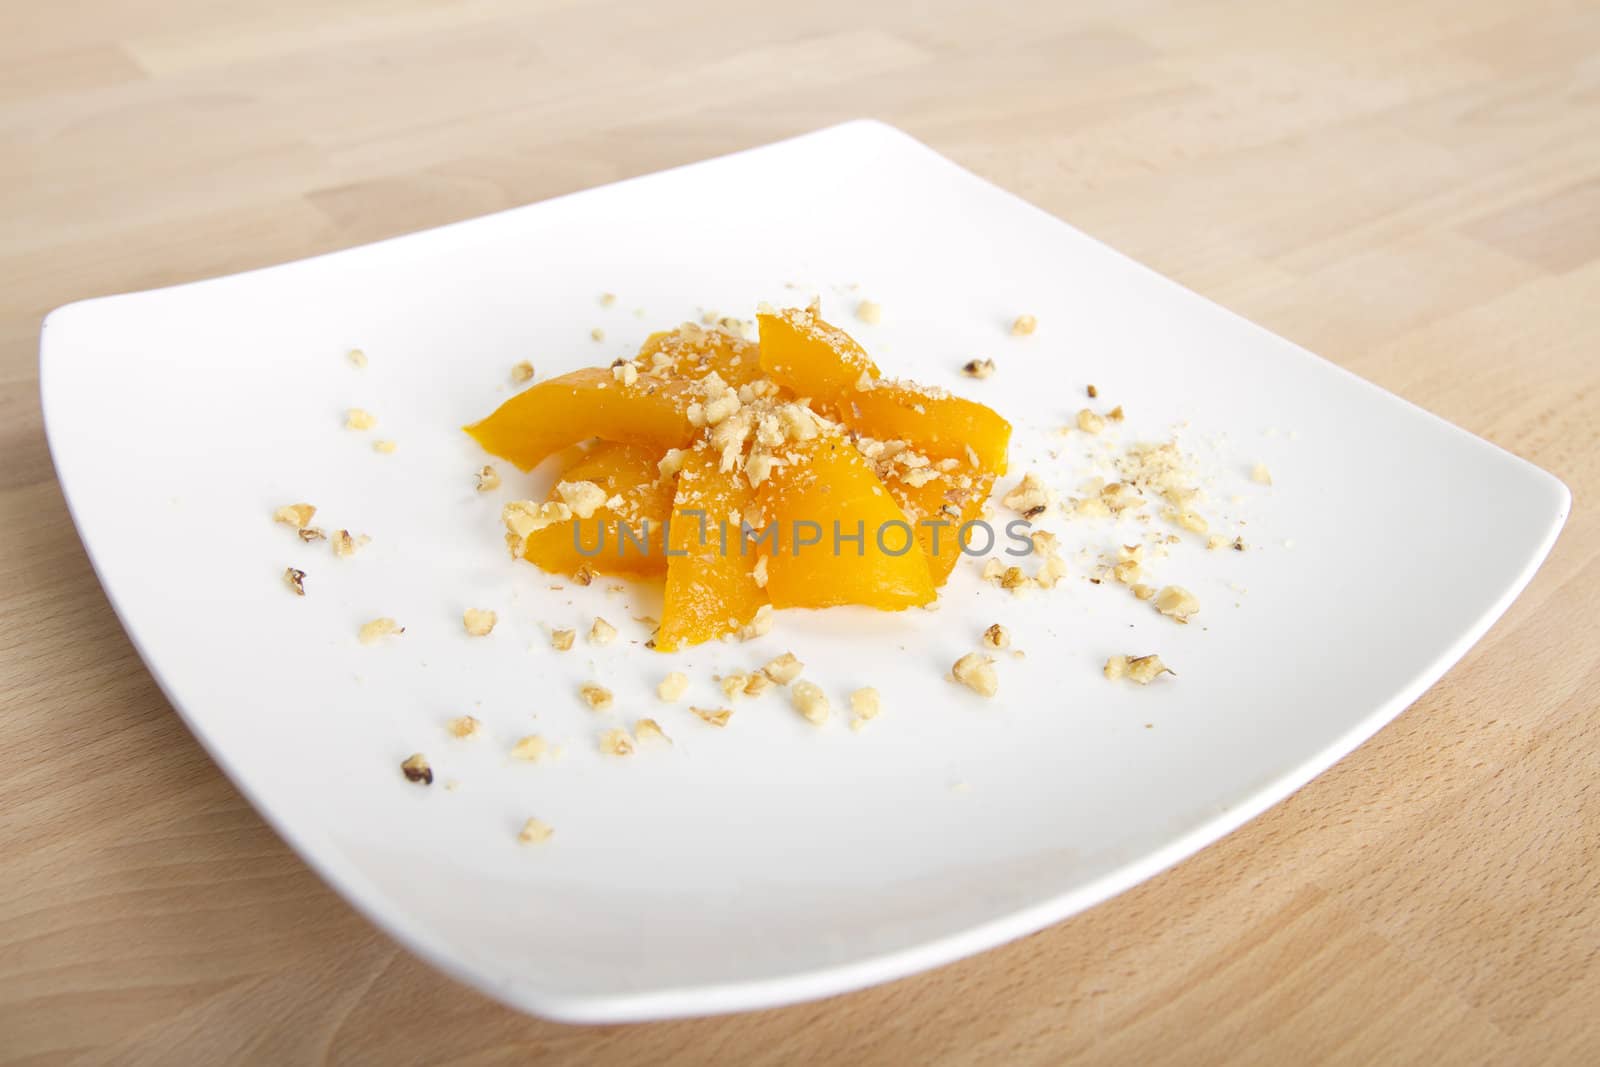 Home made Turkish traditional pumpkin dessert complimented with walnuts on large white plate on beech wood table.